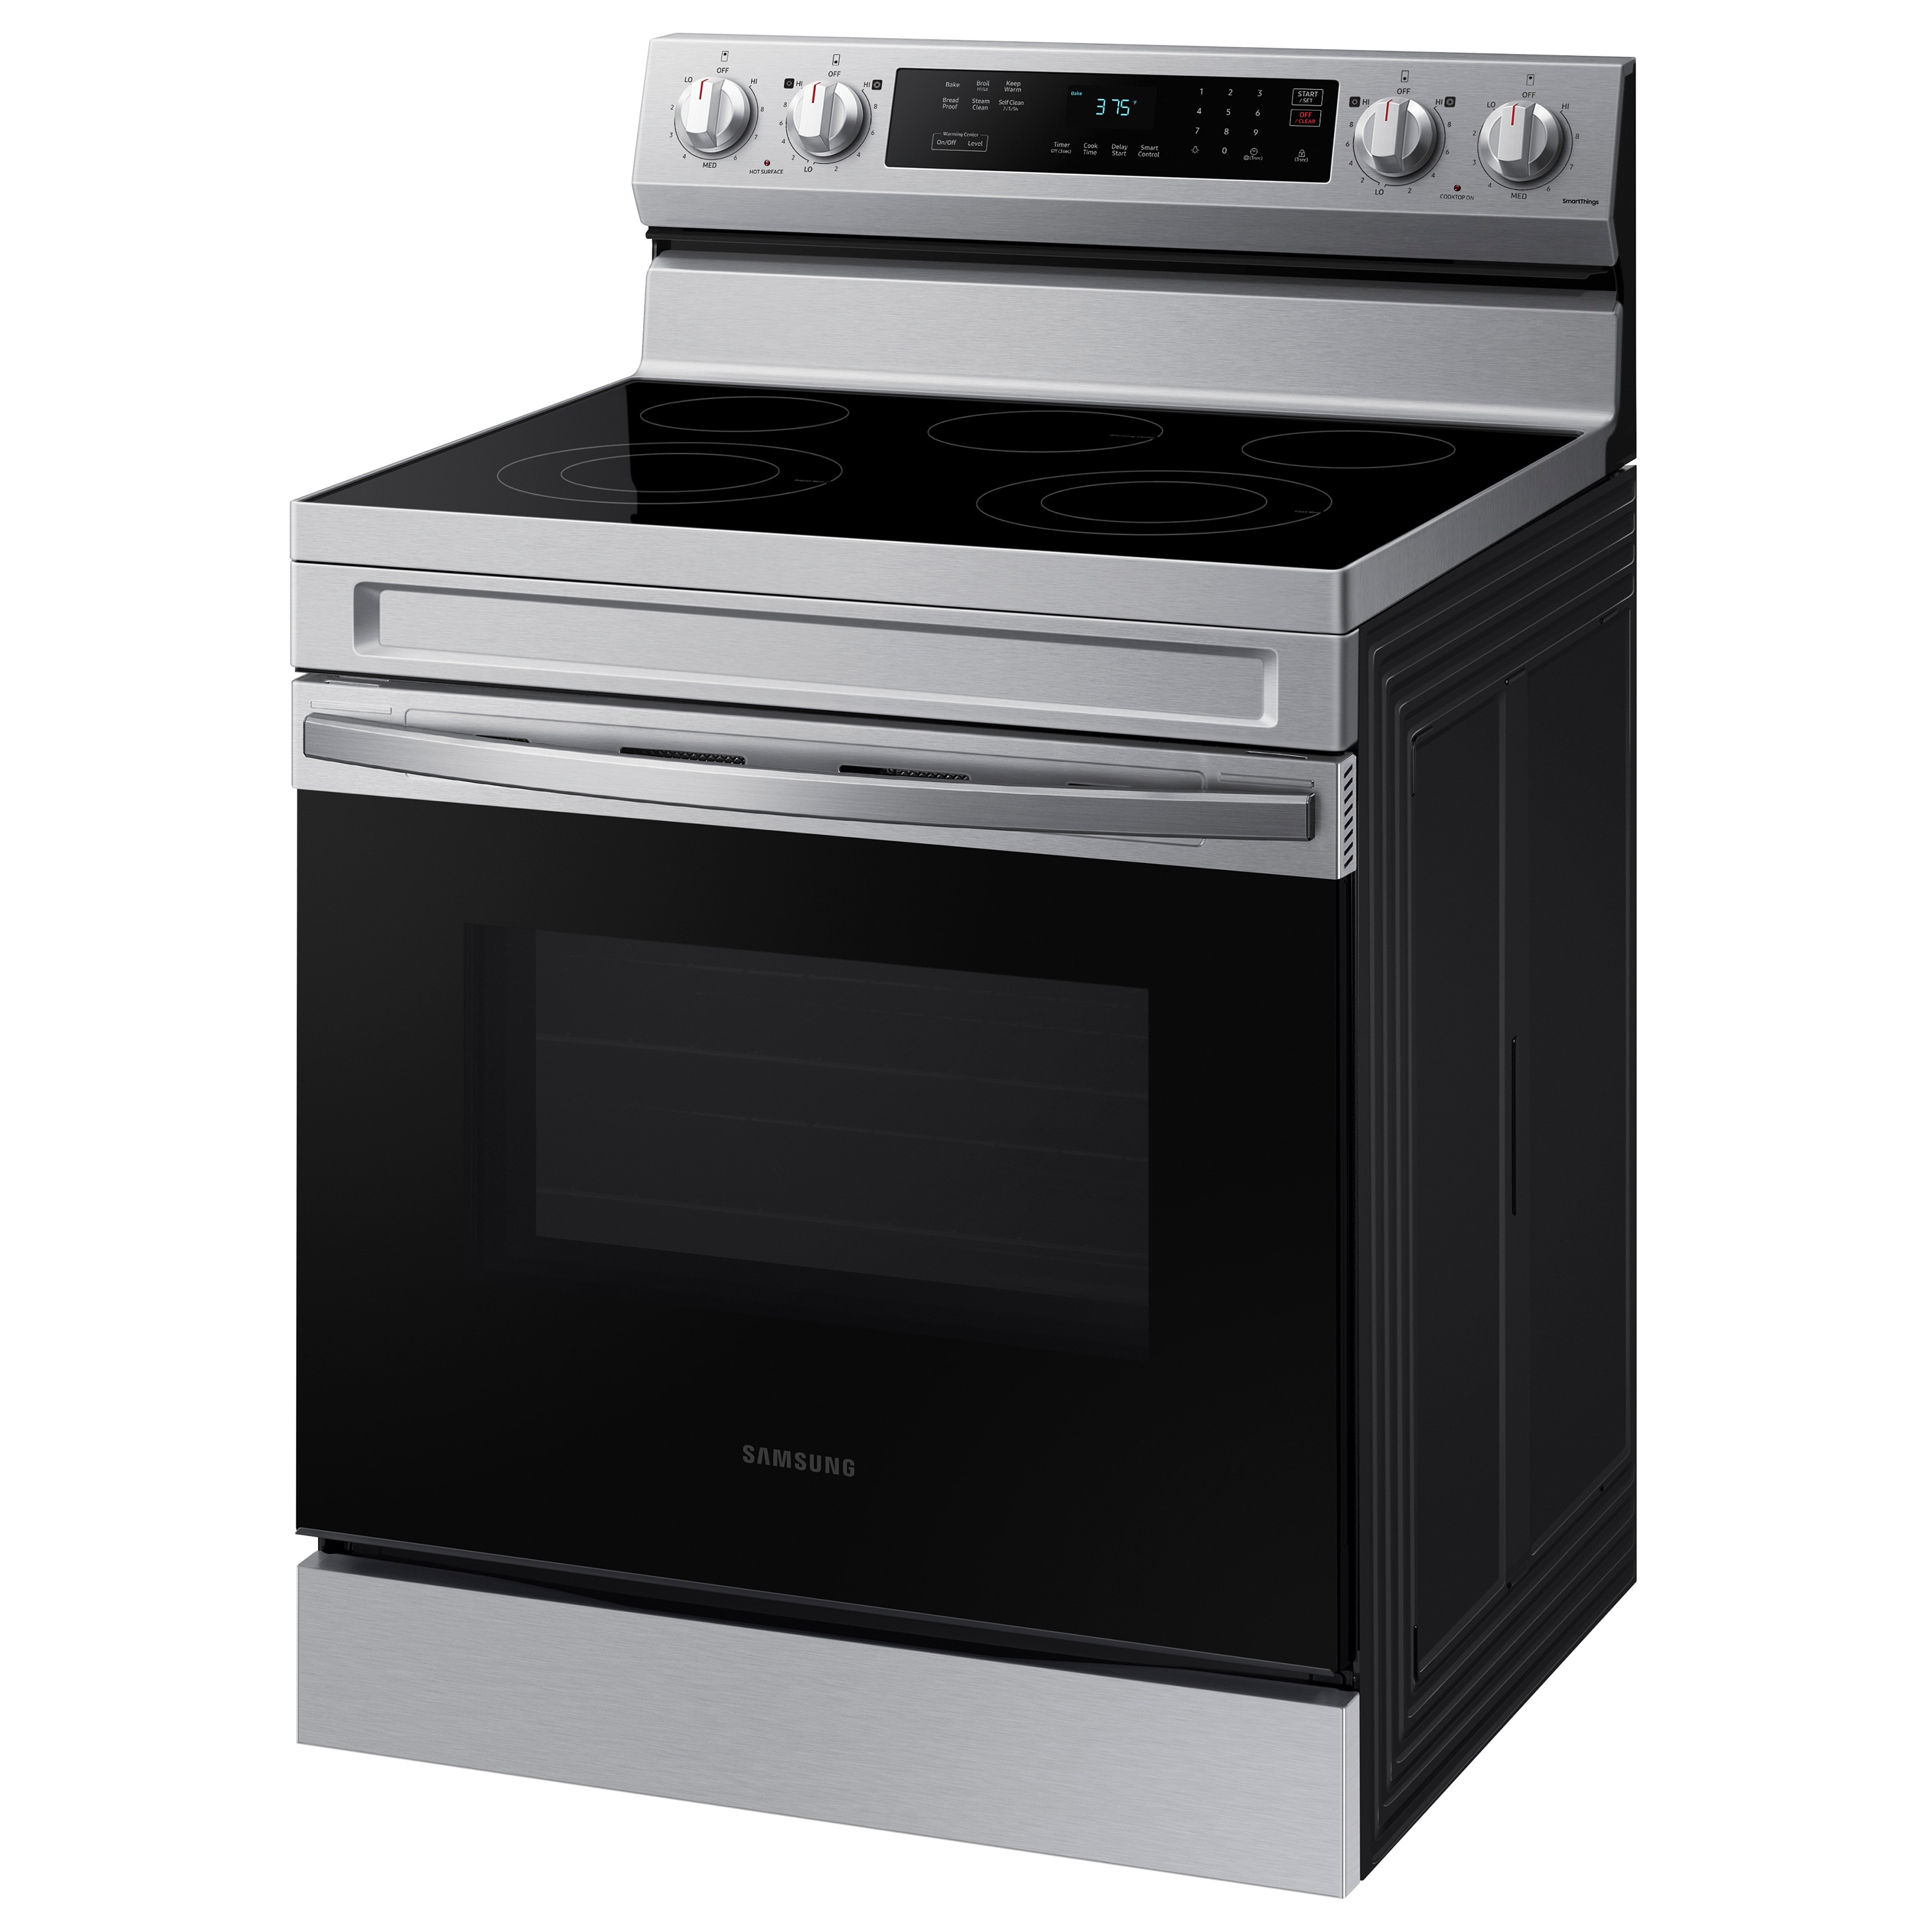 KitchenAid 6.4 cu. ft. Slide-In Electric Range with Self-Cleaning  Convection Oven in Stainless Steel KSEG700ESS - The Home Depot